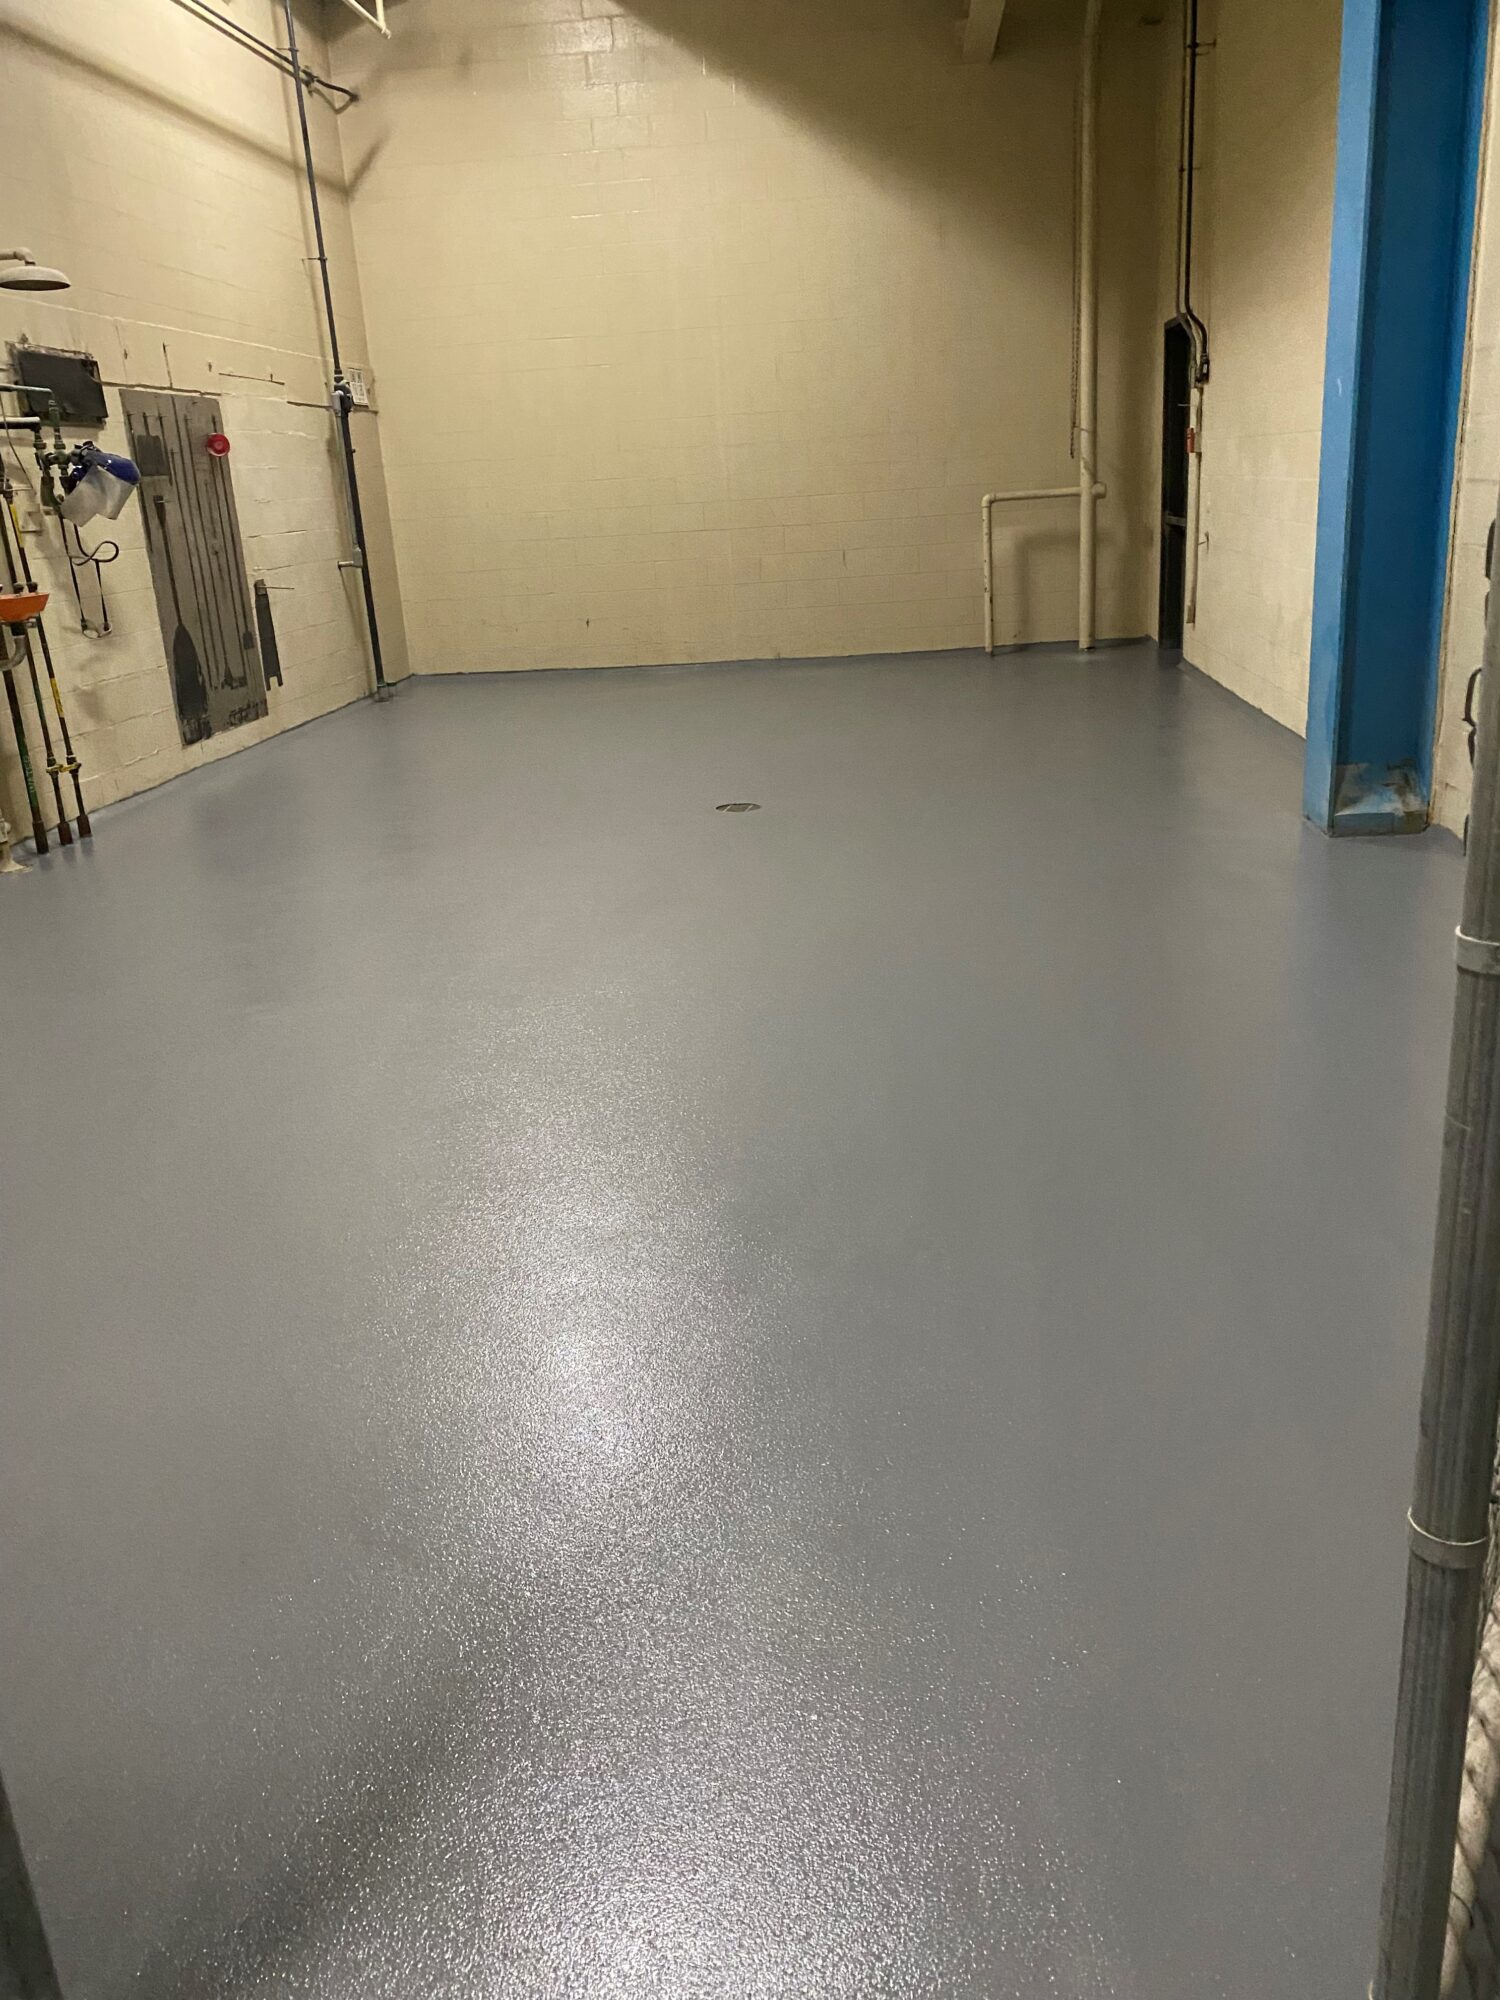 USDA Approved Floor Coatings, Urethane Concrete Cementitious Urethane Coatings, Food & Beverage Manufacturing, Food&BeverageFlooring TeamIA, Industrial Applications Inc., IA30yrs, Jackson TN